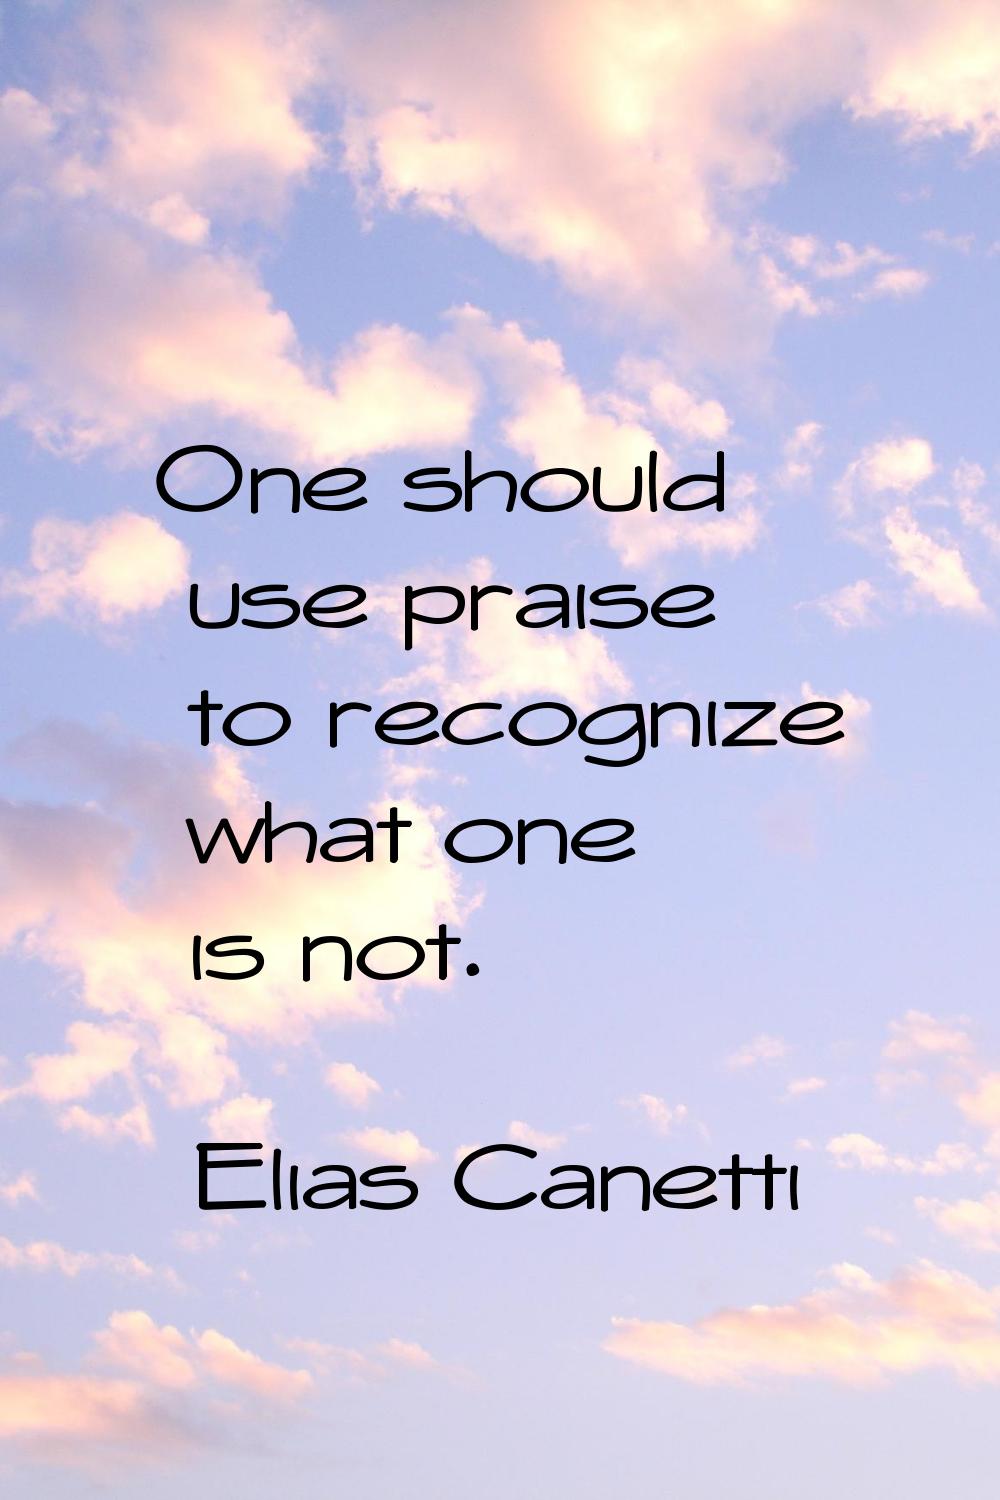 One should use praise to recognize what one is not.